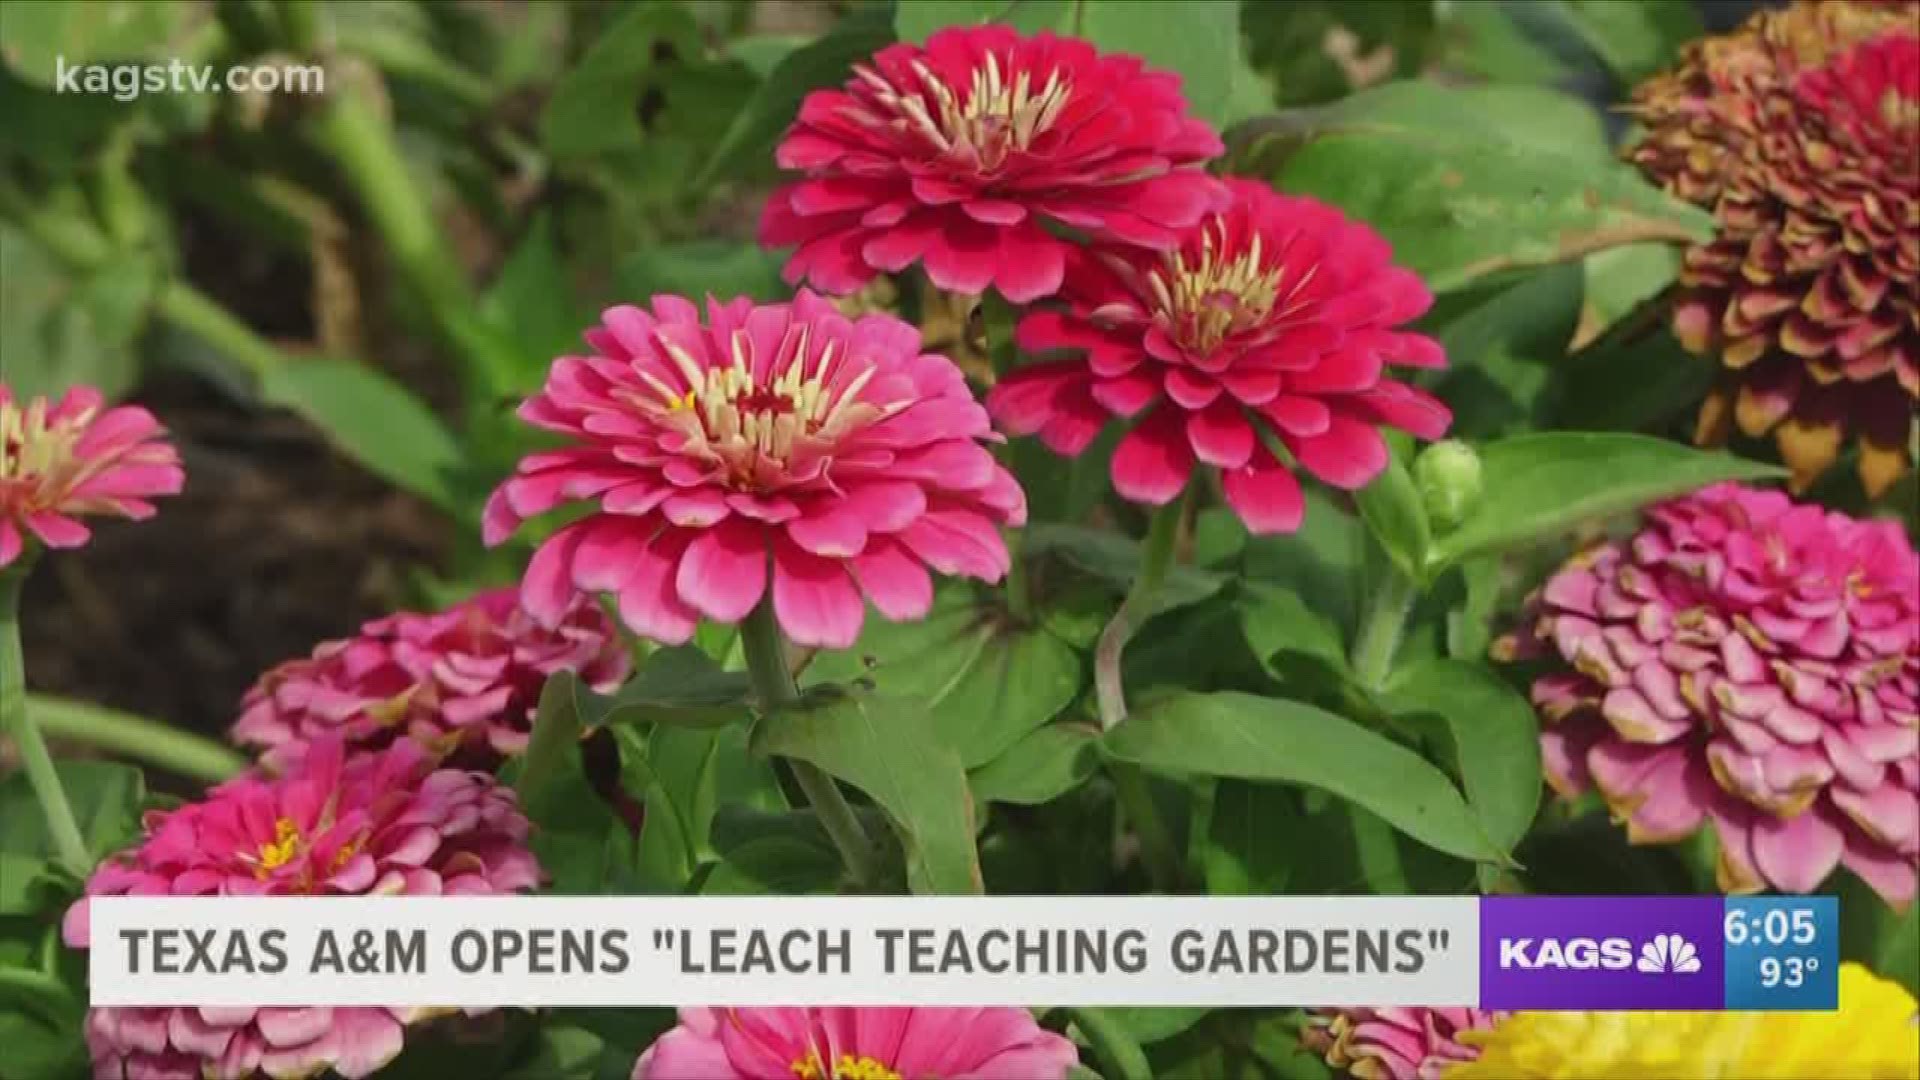 Texas A&M University presents the "Leach Teaching Gardens", a project that has been in the works for many years now.